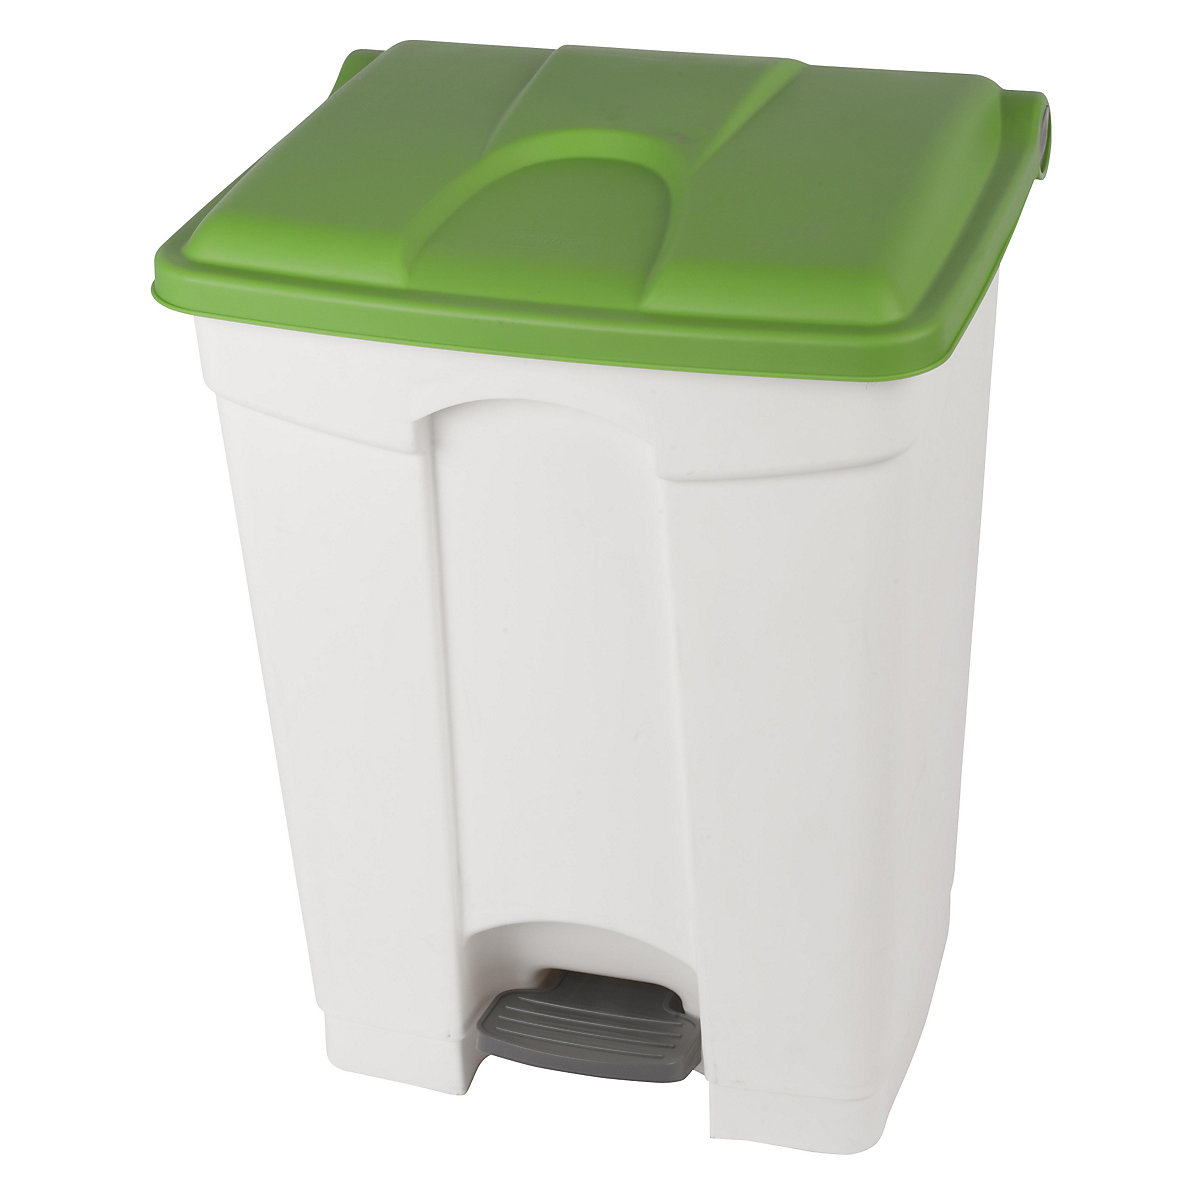 EUROKRAFTbasic – Pedal waste collector, capacity 70 l, WxHxD 505 x 675 x 415 mm, white, green lid